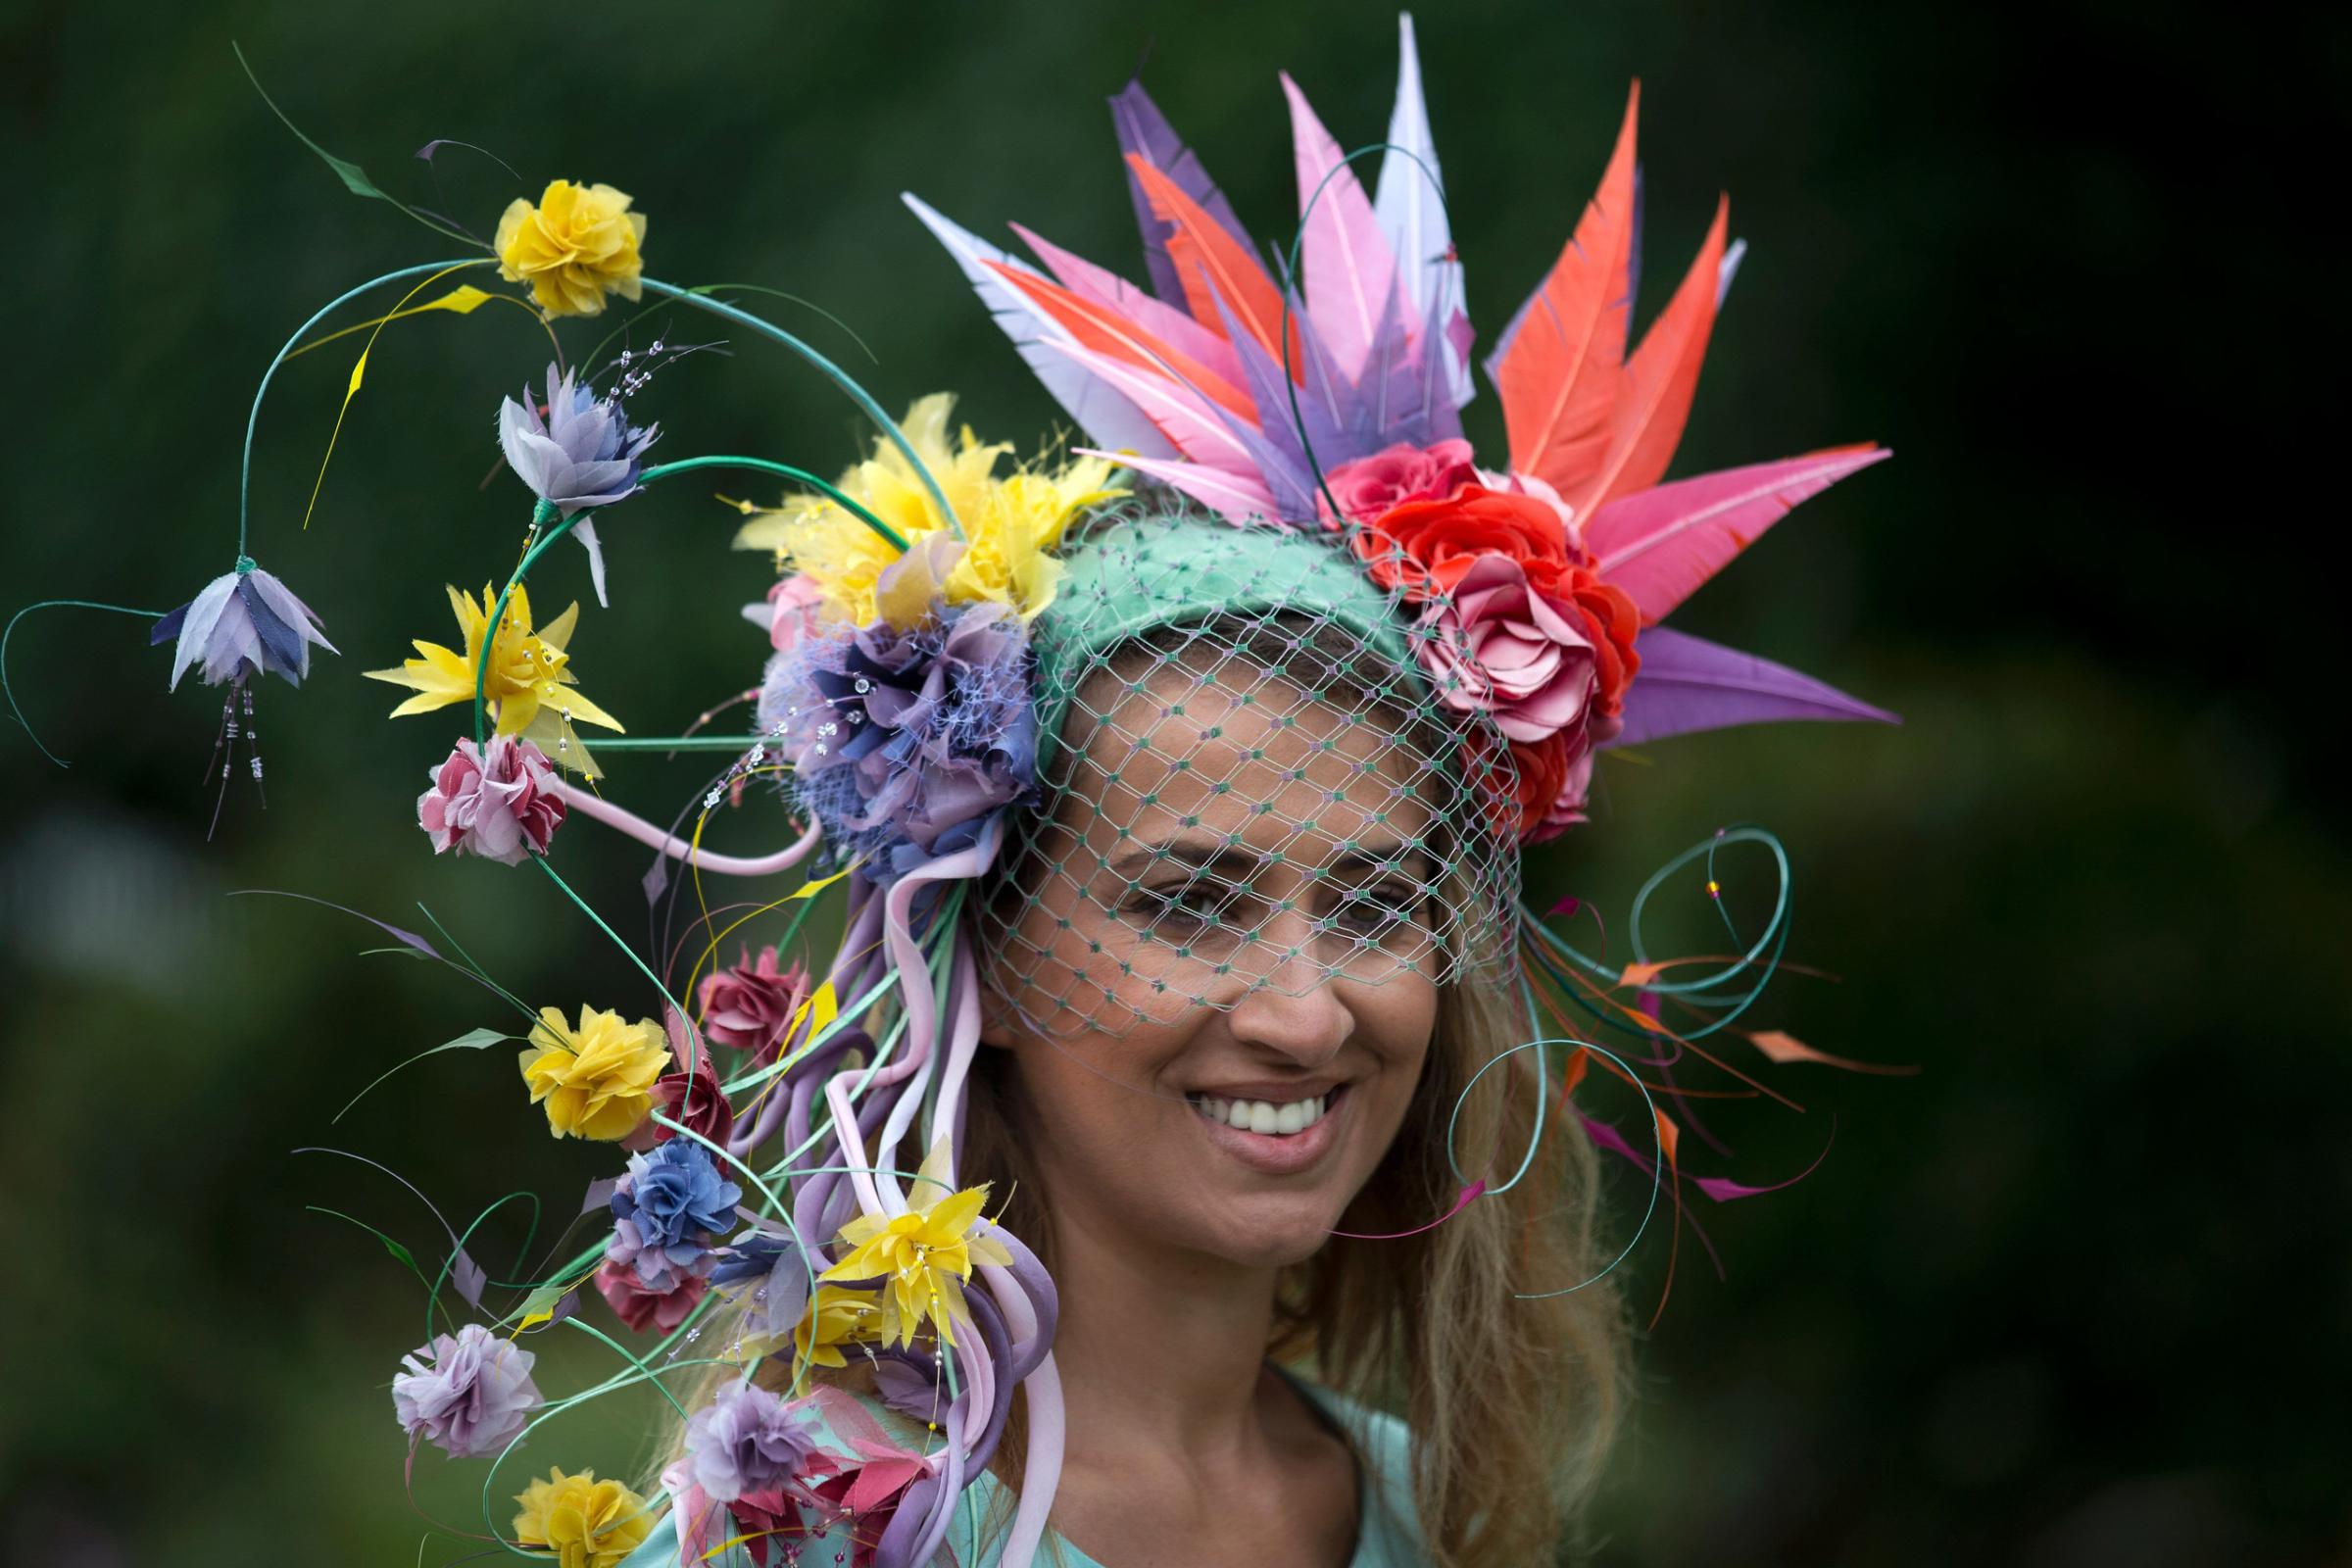 A racegoer poses for photographers on the first day on the first day of the Royal Ascot horse racing meet, in Ascot, west of London, on June 14, 2016. / AFP PHOTO / JUSTIN TALLISJUSTIN TALLIS/AFP/Getty Images